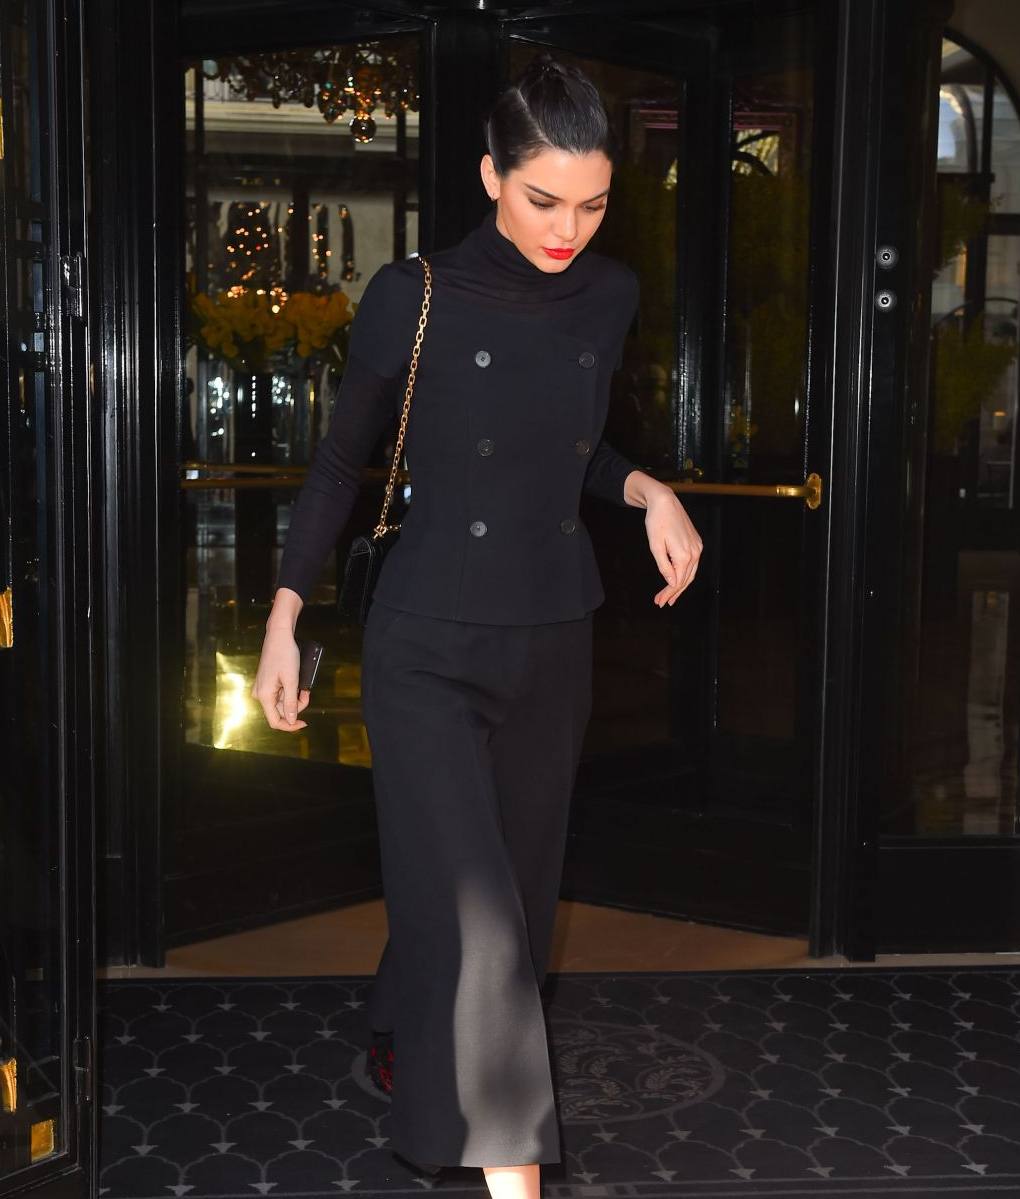 kendall-jenner-leaving-at-four-seasons-hotel